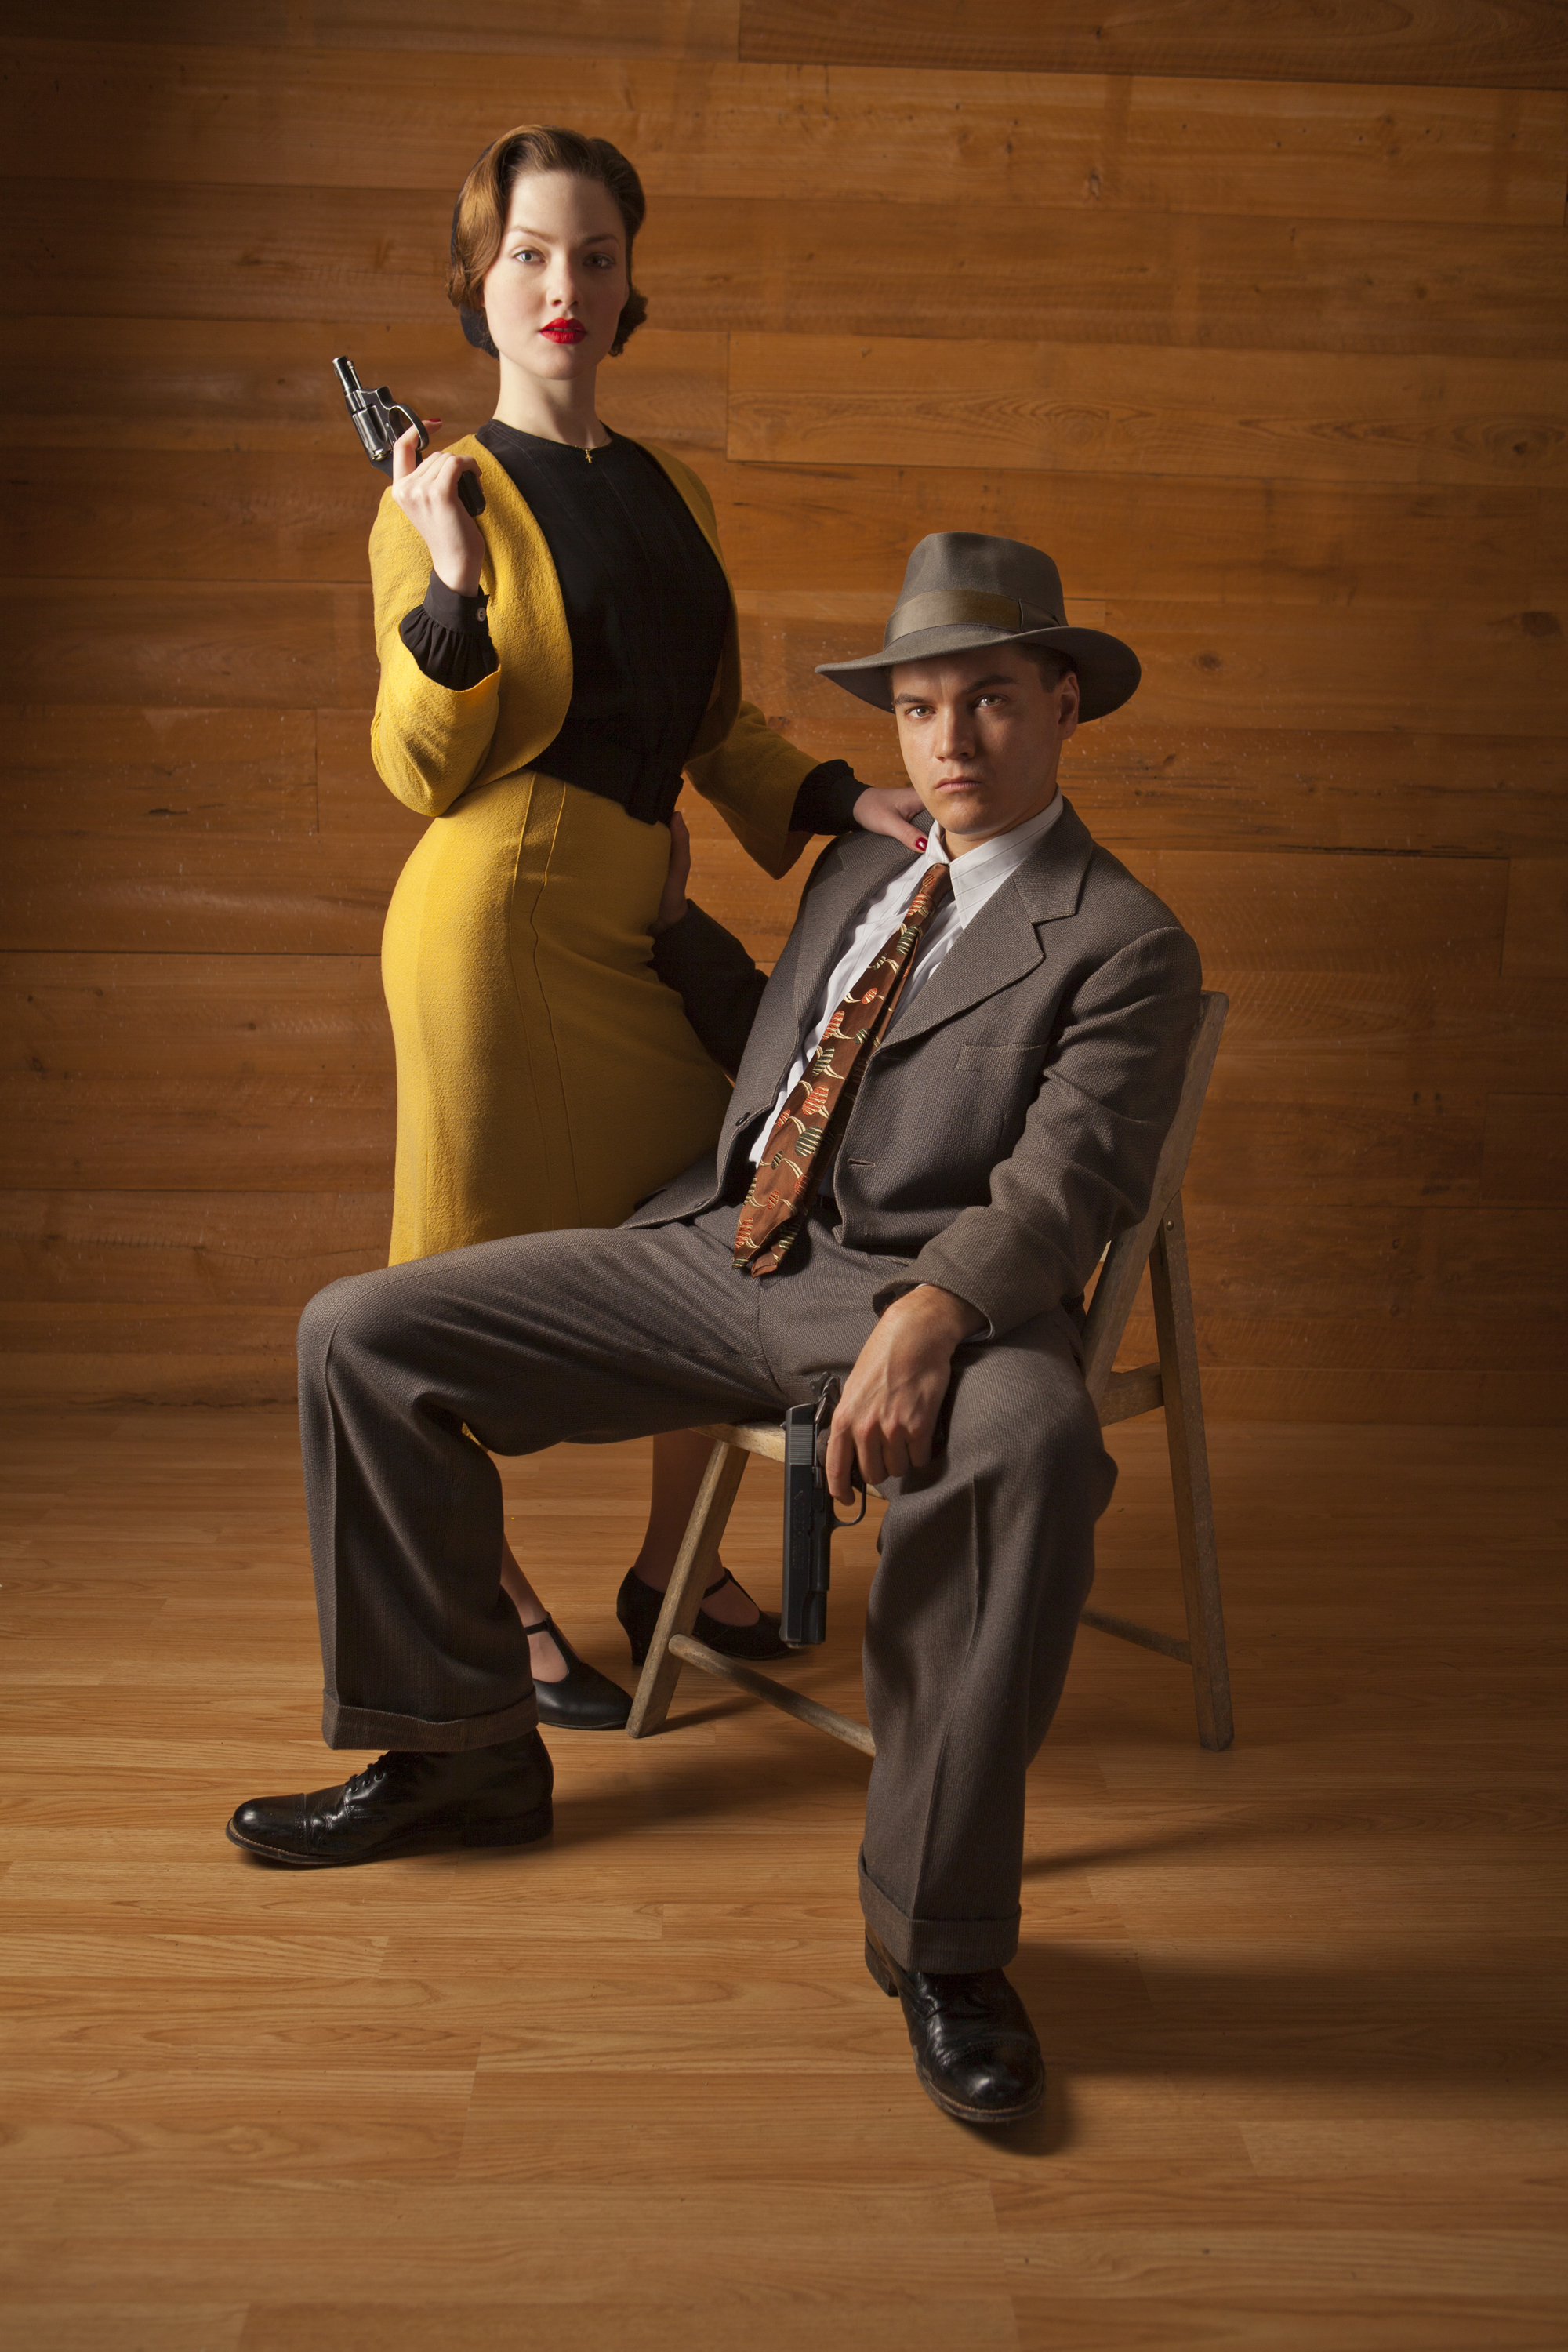 Bonnie And Clyde Halloween costumes